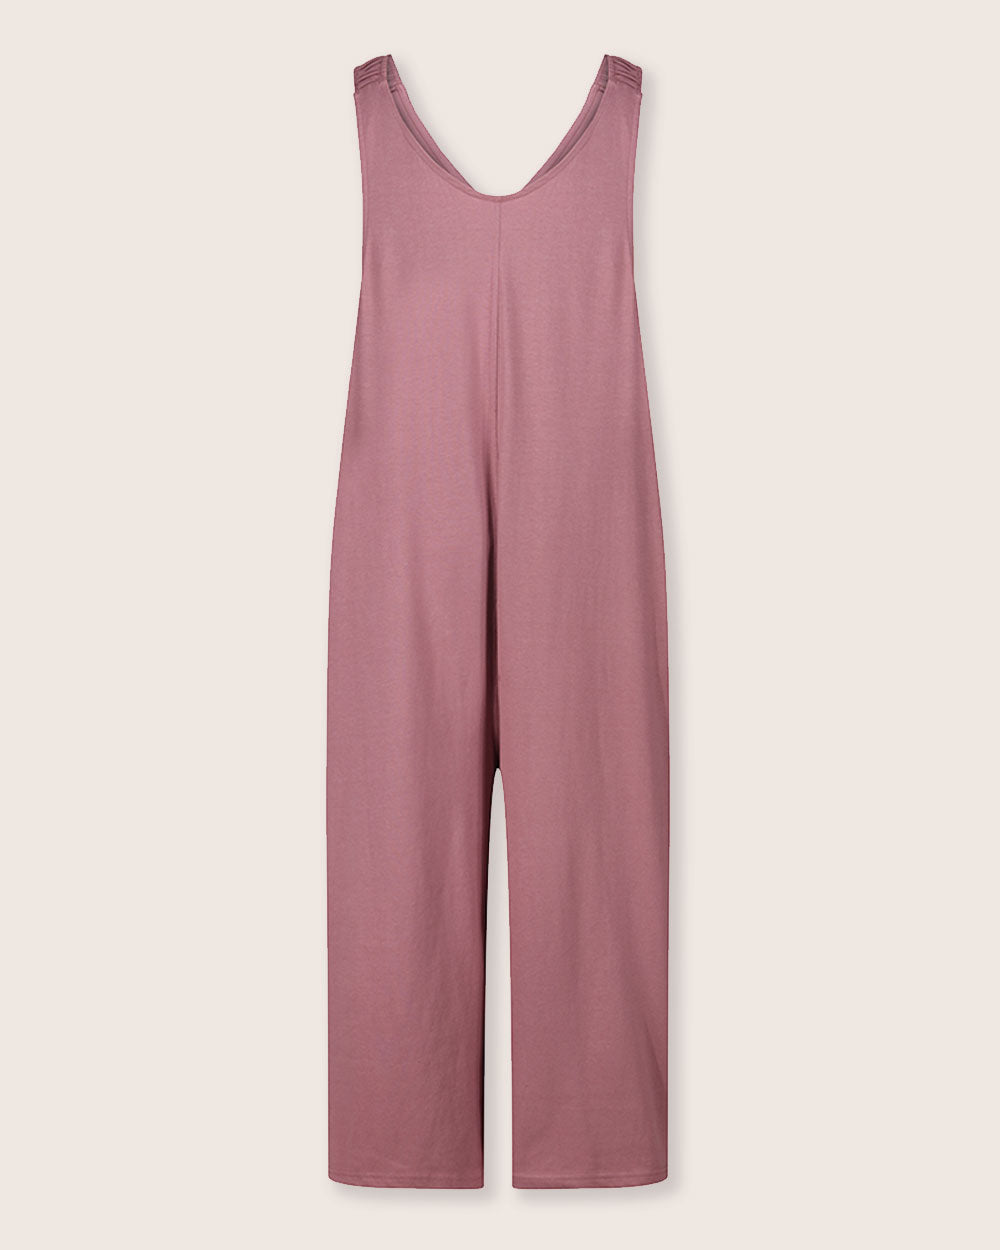 Loose fitting dungarees overalls for women